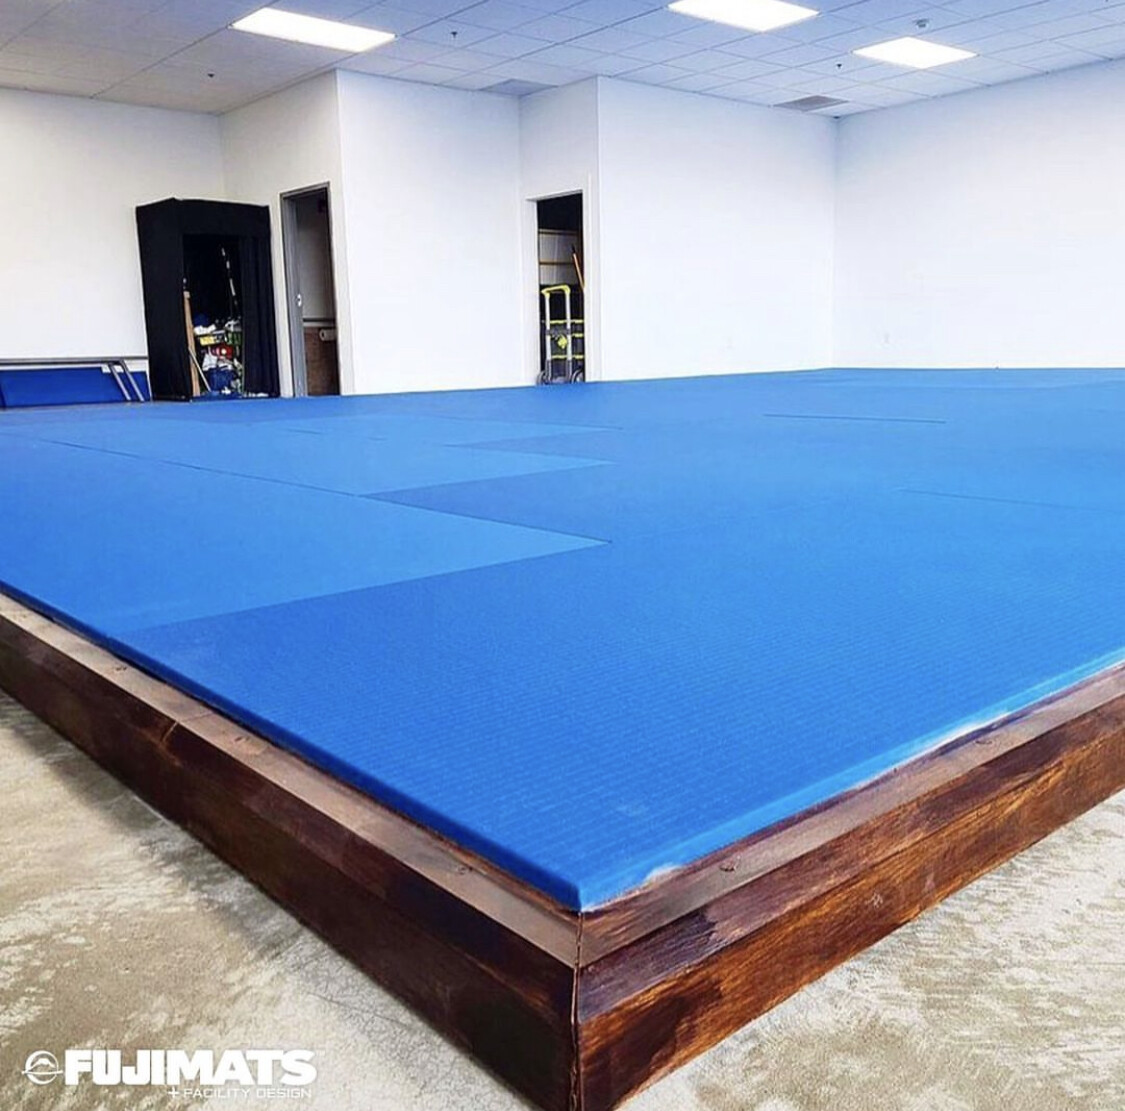 The World's Number 1 Choice for Martial Arts Training: Fuji Mats image